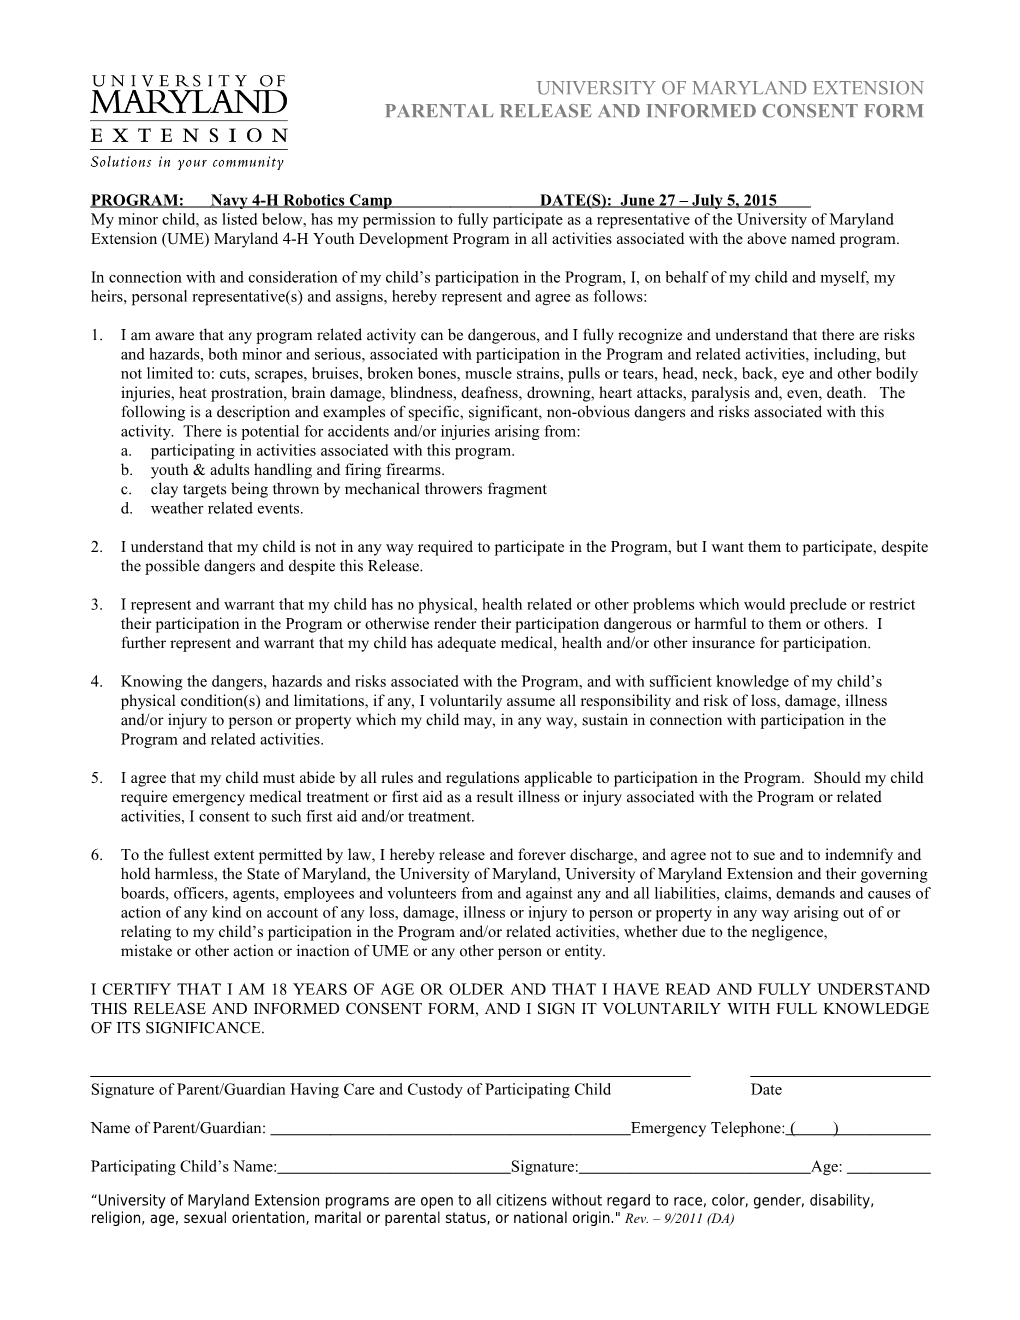 Parental Release and Informed Consent Form